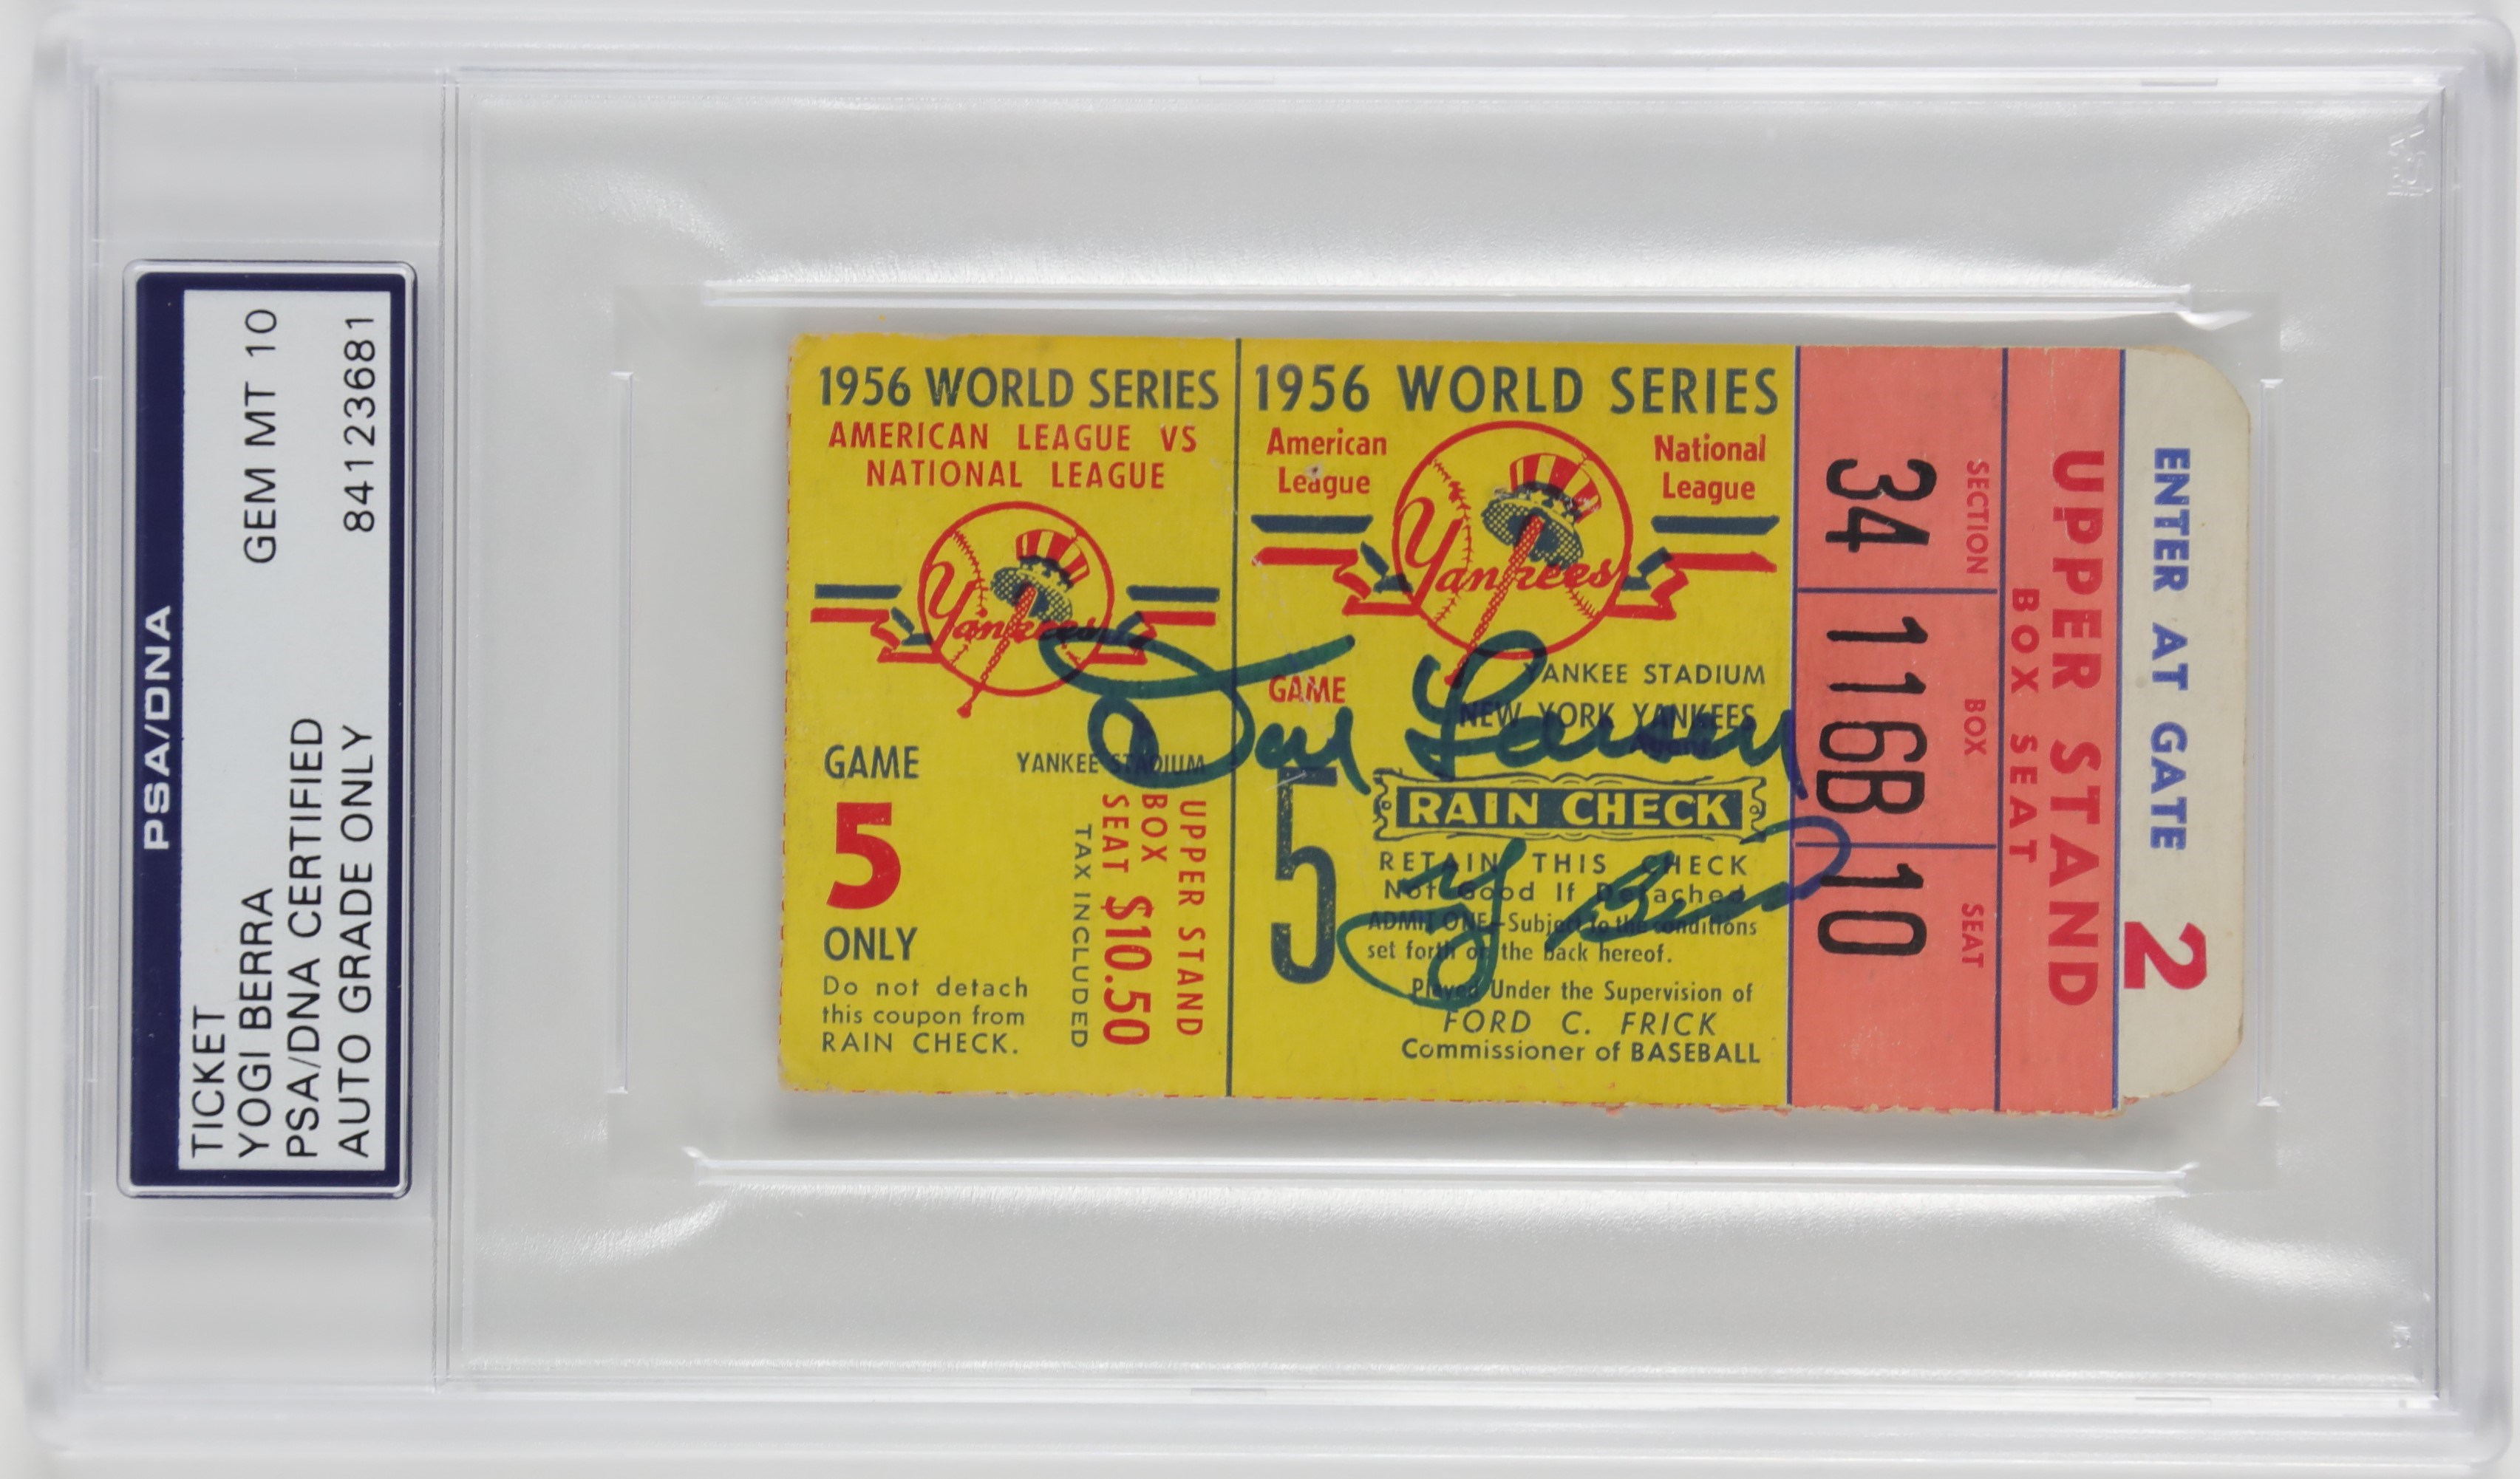 NY Yankees, Giants & Mets - 1956 World Series Perfect Game Ticket Signed by Berra & Larsen (PSA 10)